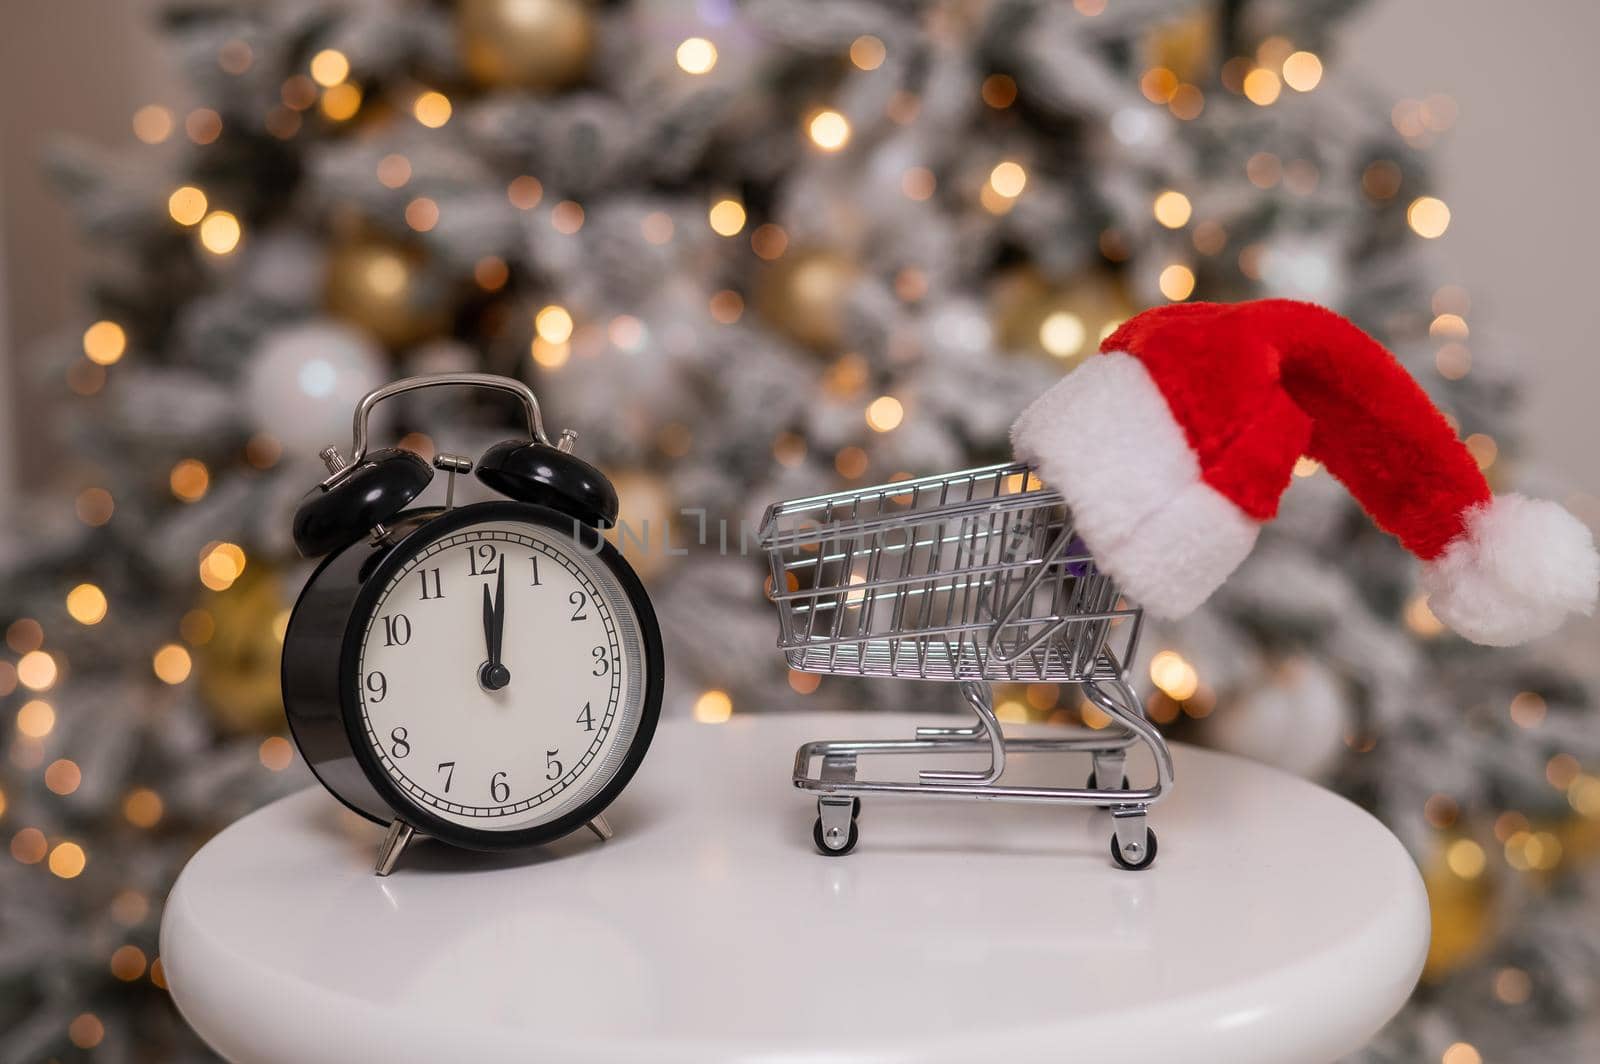 Christmas gifts shopping time. A shopping trolley with a santa hat and an alarm clock by the Christmas tree